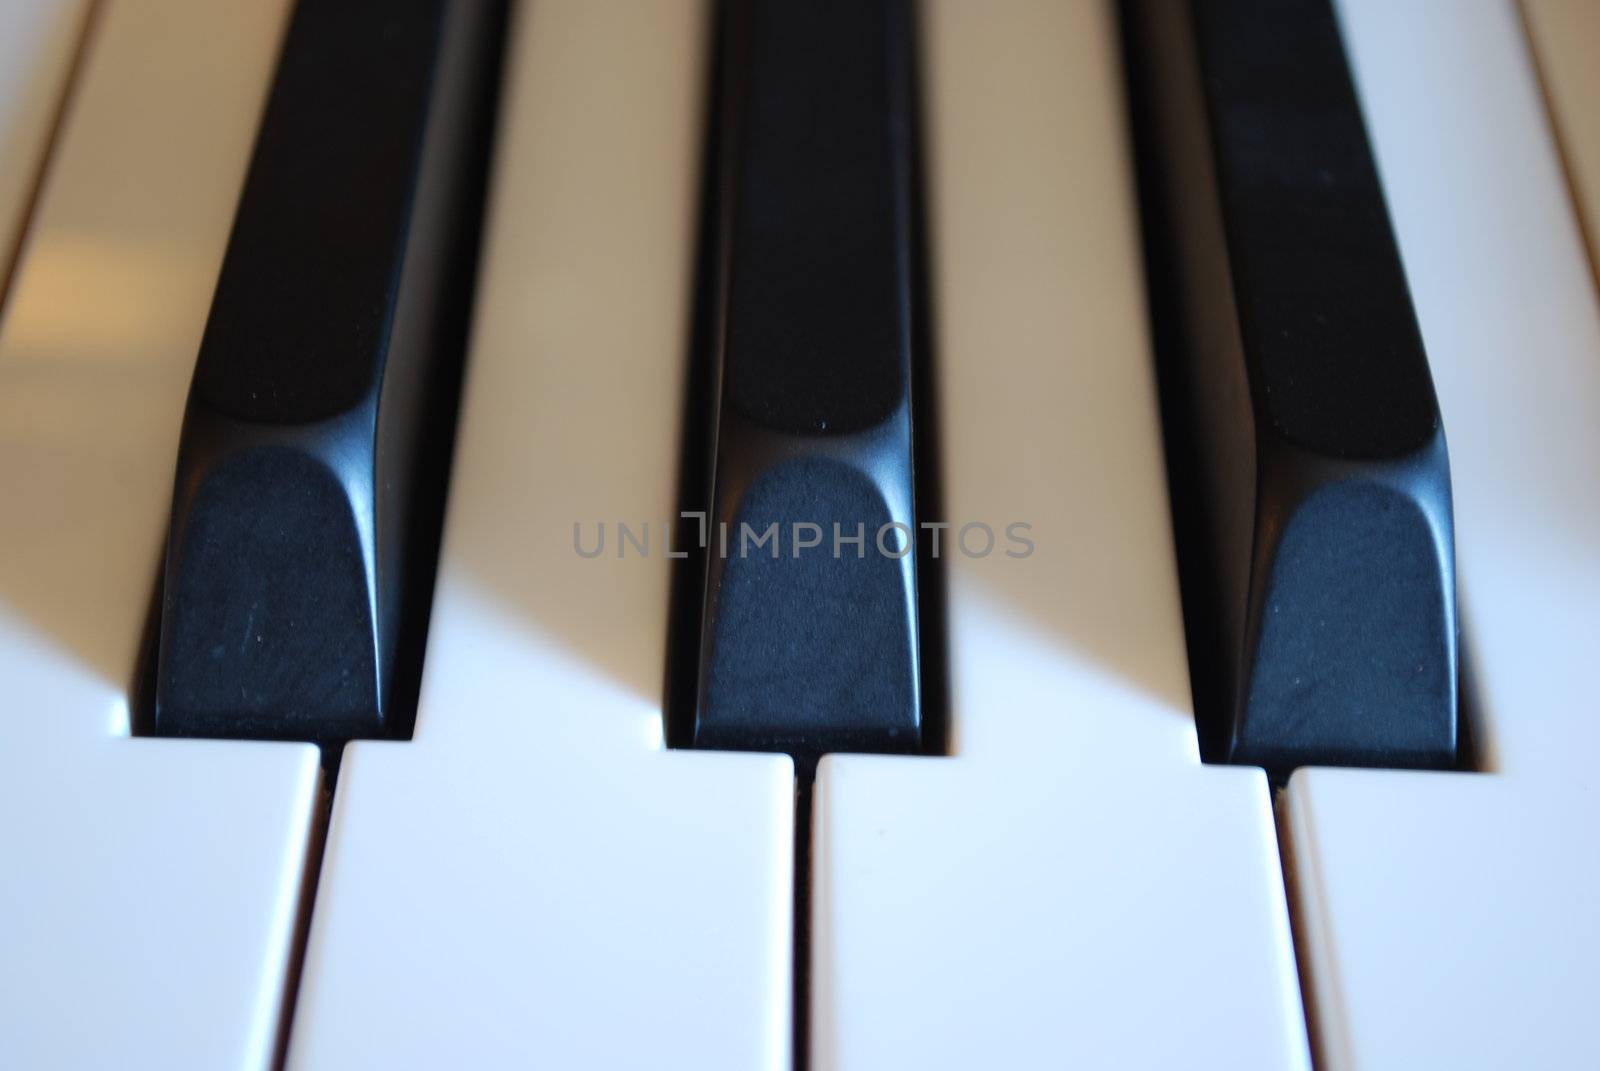 photo of a piano keys (front view)